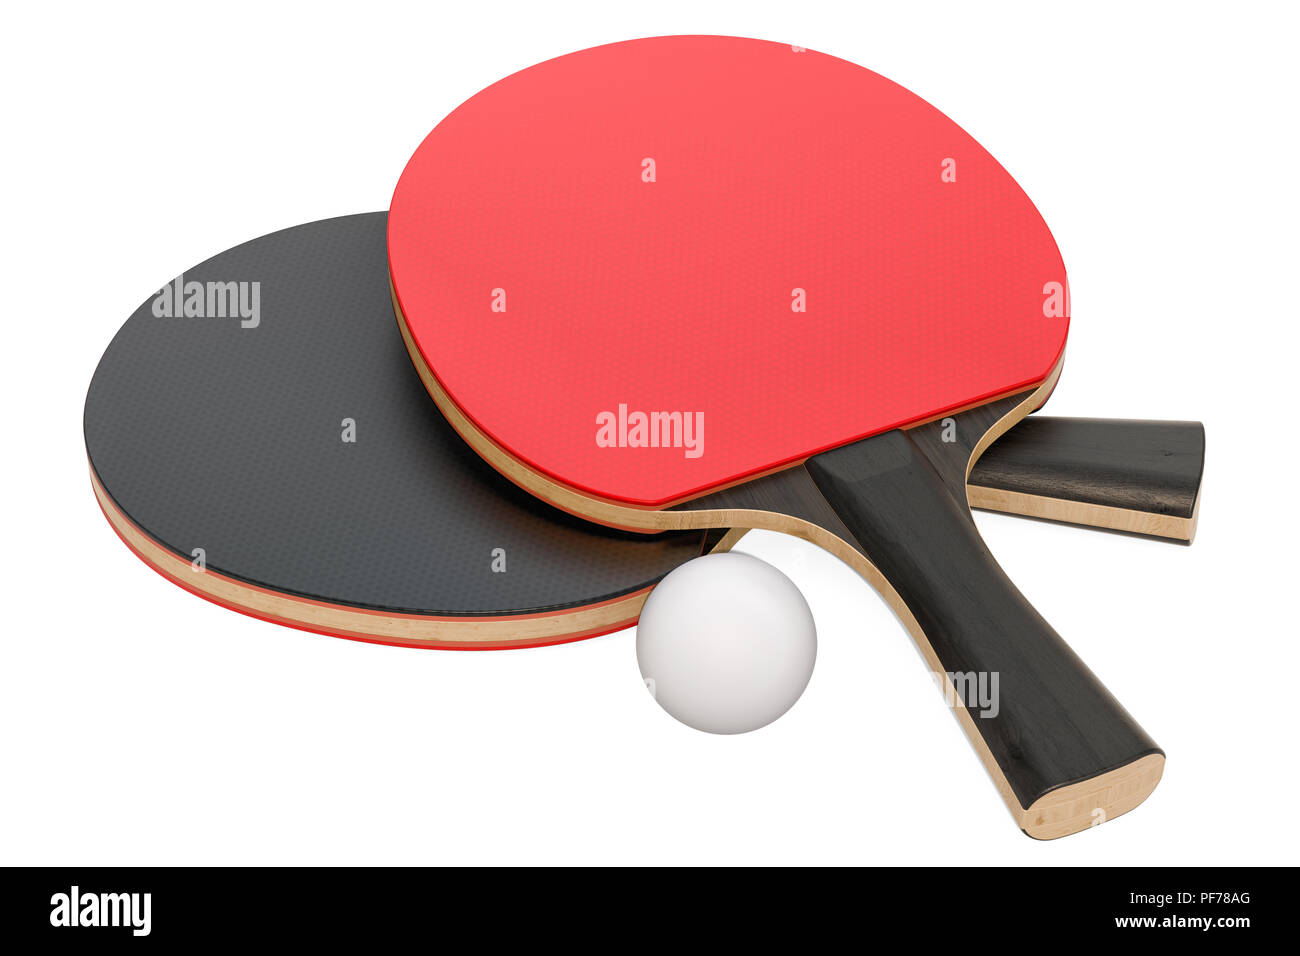 Table tennis equipment, 3D rendering isolated on white background Stock Photo